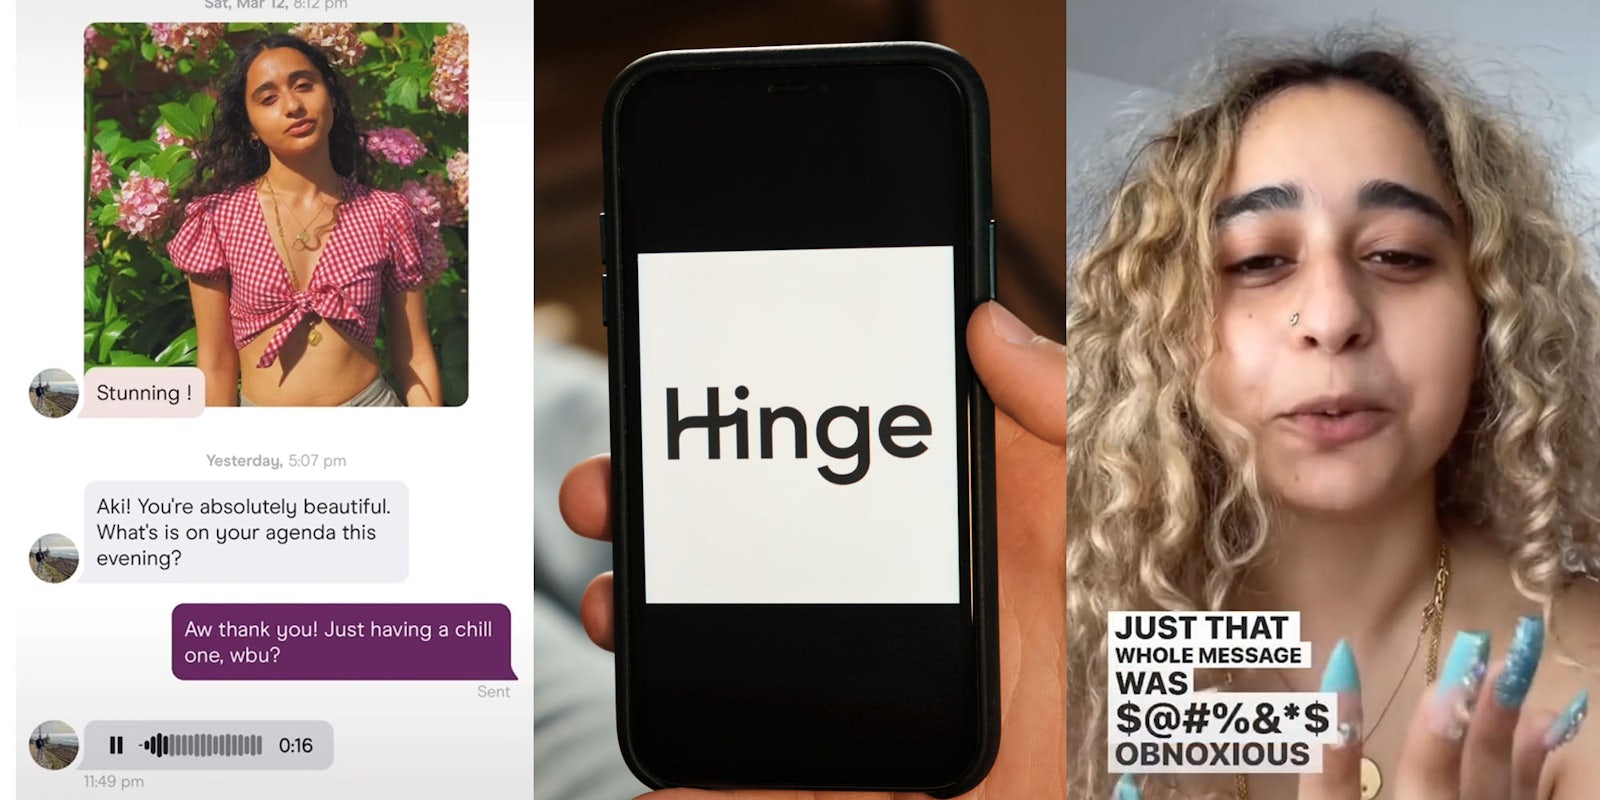 Hinge conversation photo of woman man complimenting her man sends audio message (l) hand holding phone with hinge logo (c) Woman caption ' Just that whole message was blank obnoxious' (r)